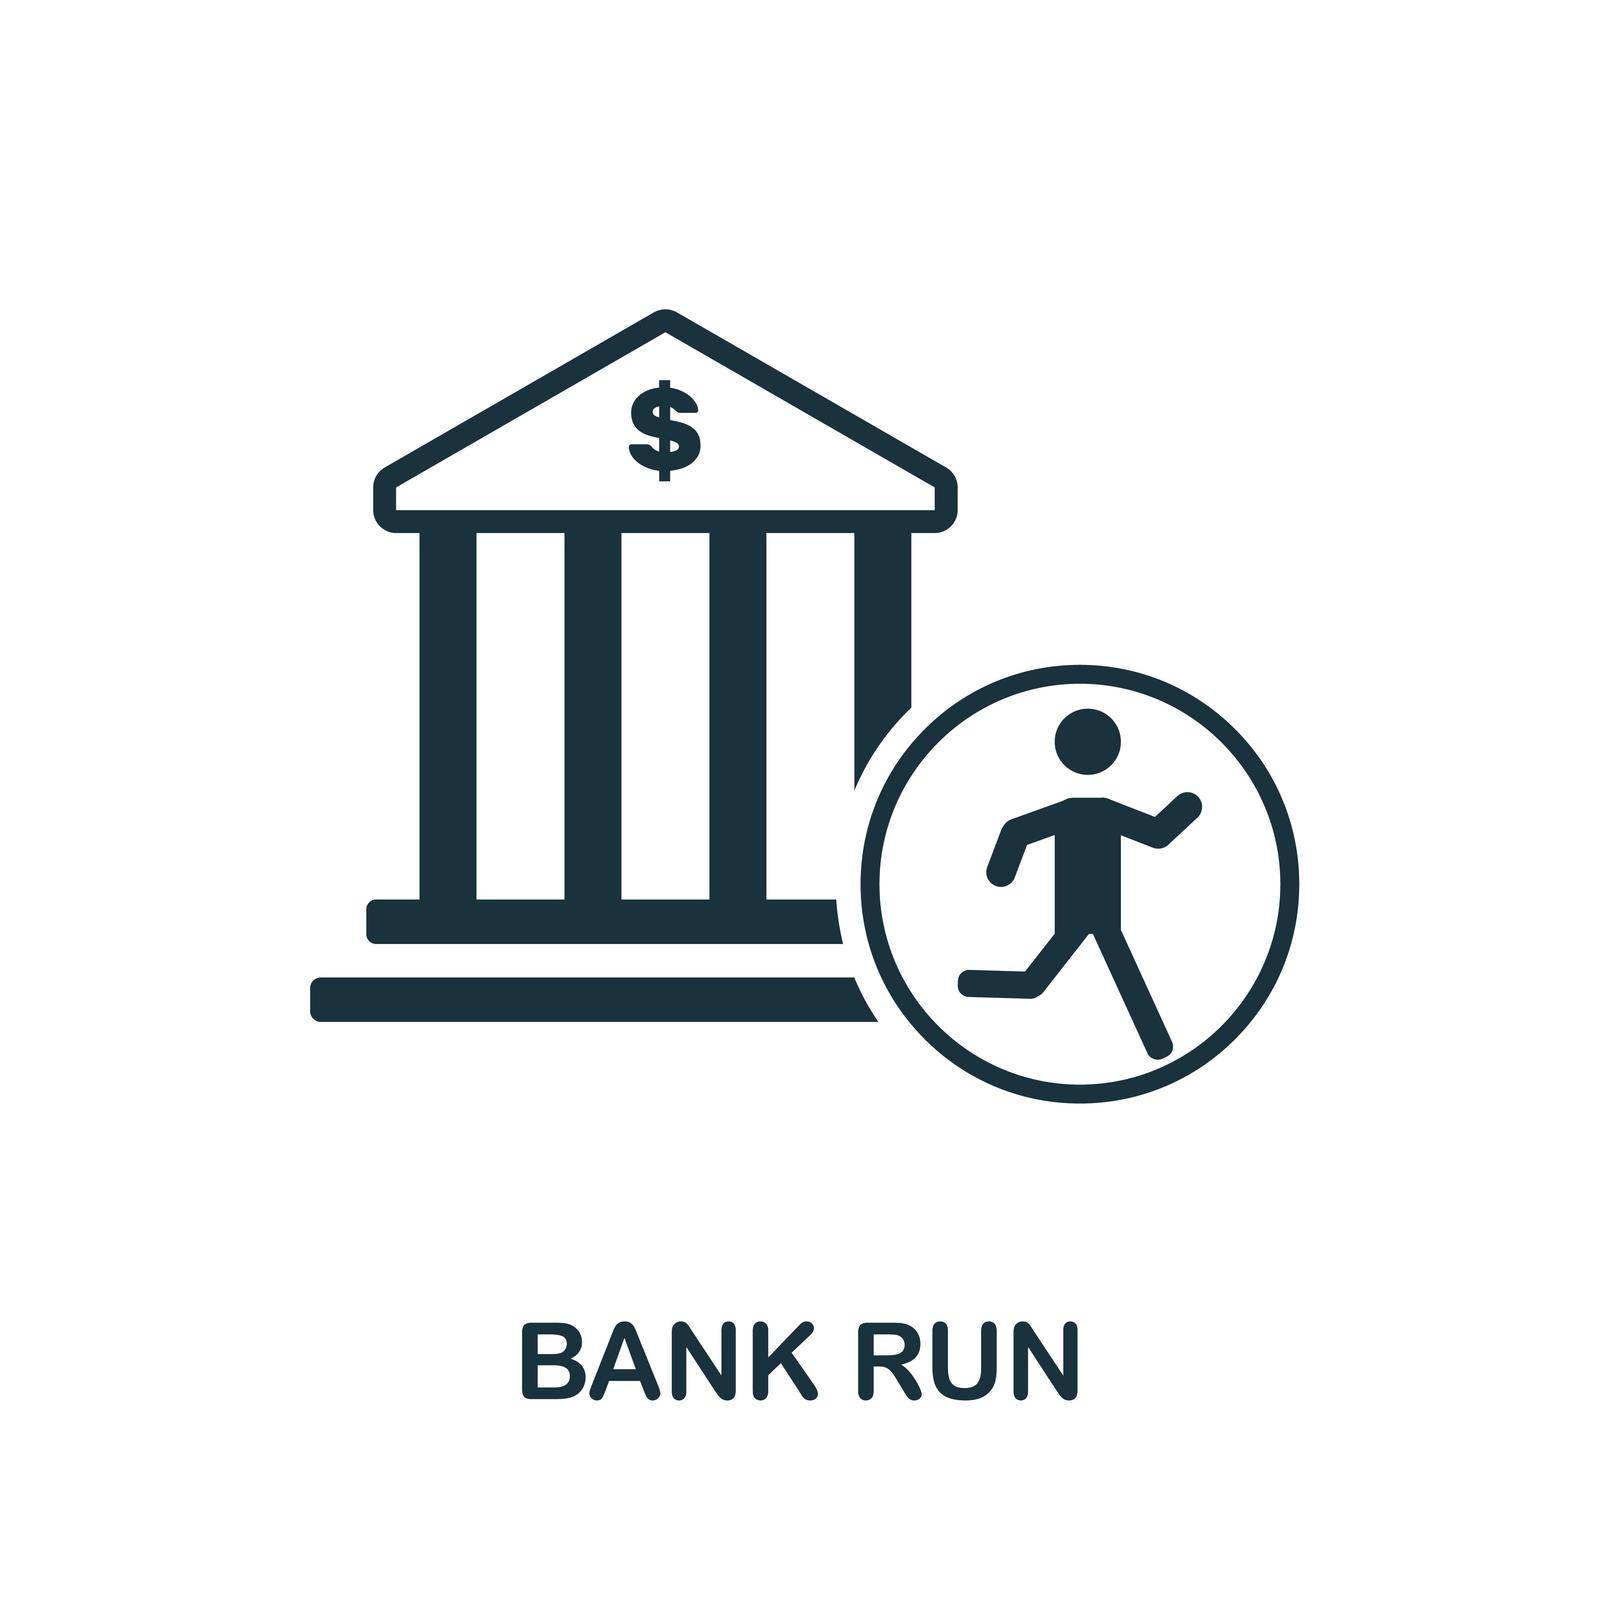 Bank Run icon. Monochrome sign from economic crisis collection. Creative Bank Run icon illustration for web design, infographics and more by simakovavector